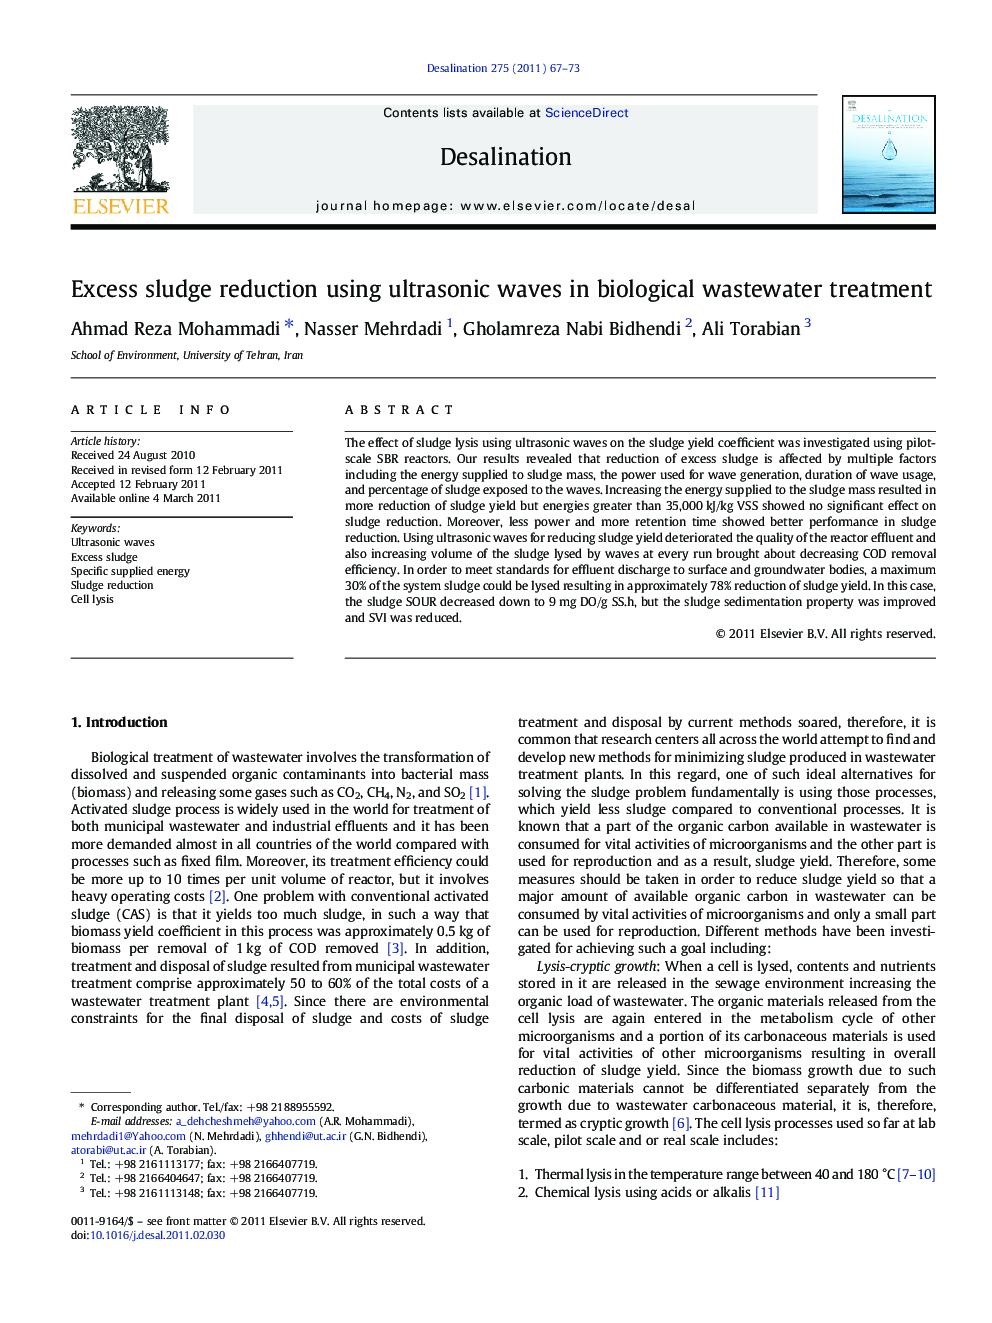 Excess sludge reduction using ultrasonic waves in biological wastewater treatment